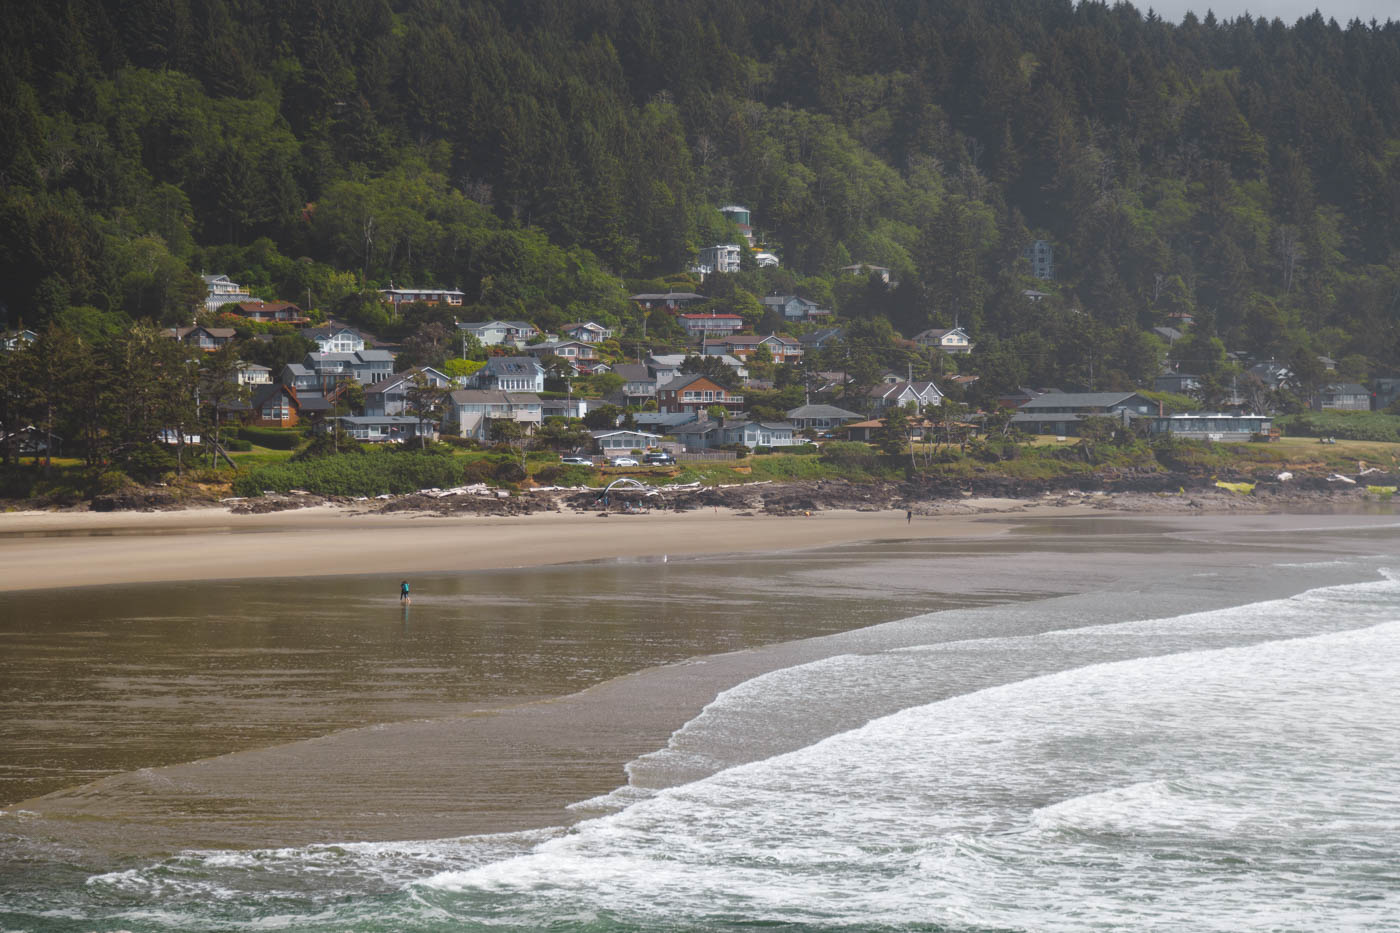 A few tourists walking along Yachats Beach with houses and trees in the background in Oregon.